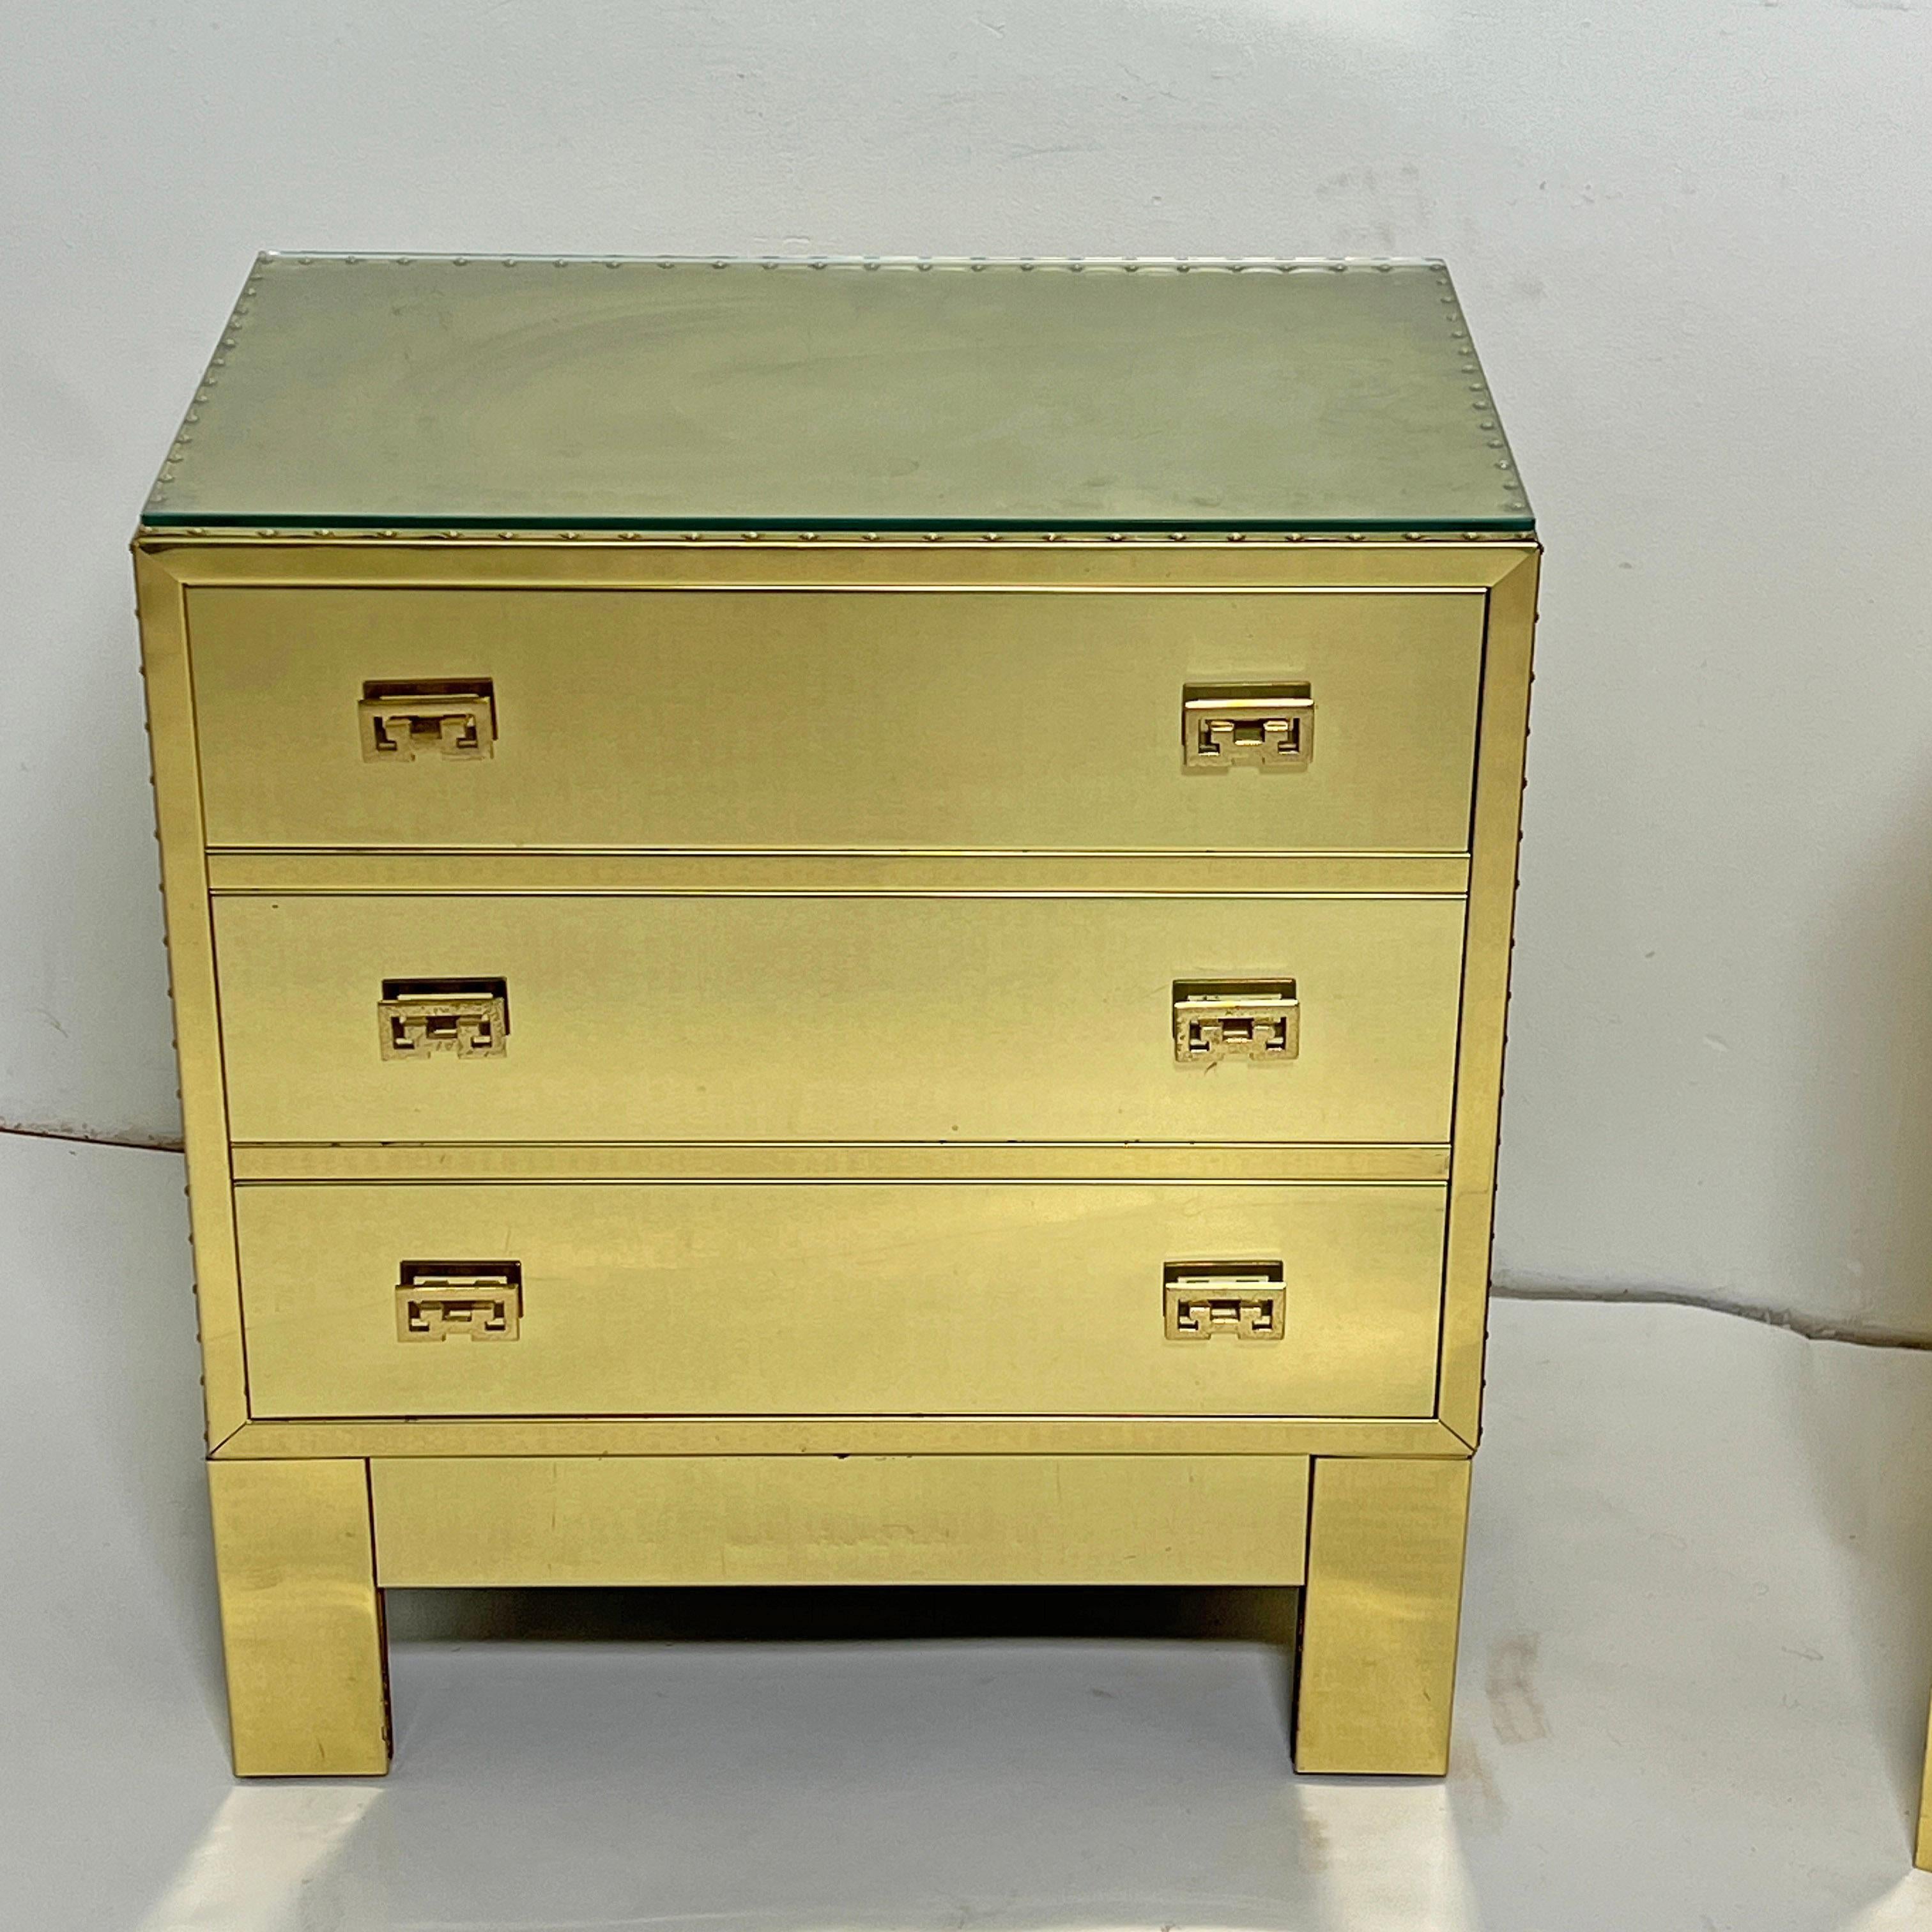 A pair of nightstand height three drawer brass clad chests with stud details, most likely by Sarreid Ltd., circa 1970s. Includes a pair of glass tops, though could be used without (see final two images).